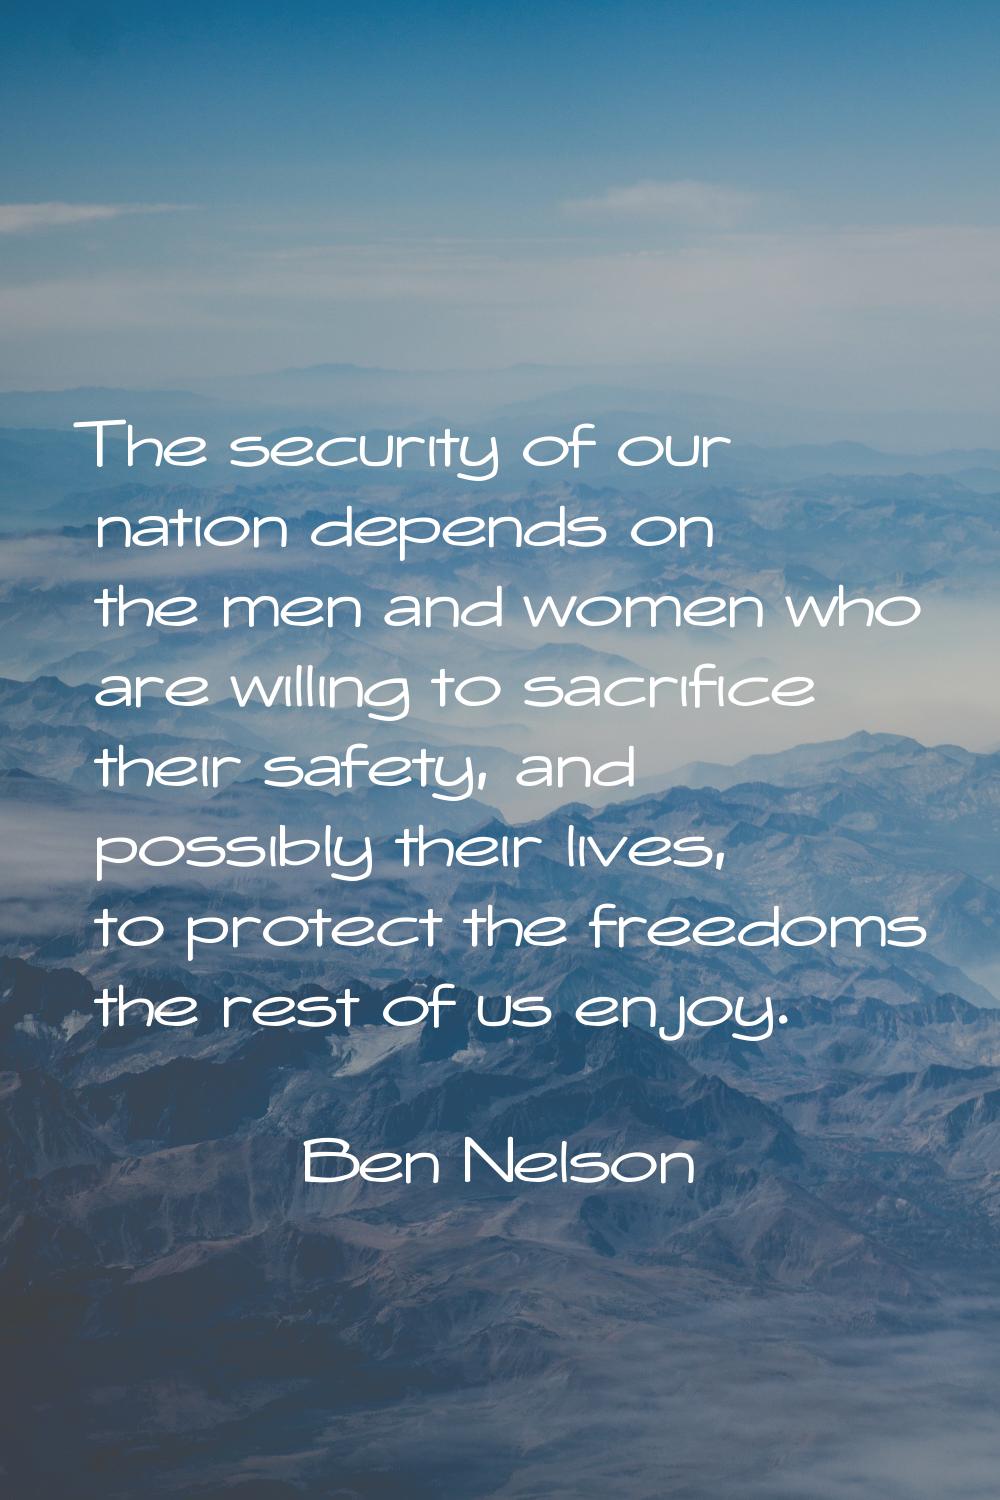 The security of our nation depends on the men and women who are willing to sacrifice their safety, 